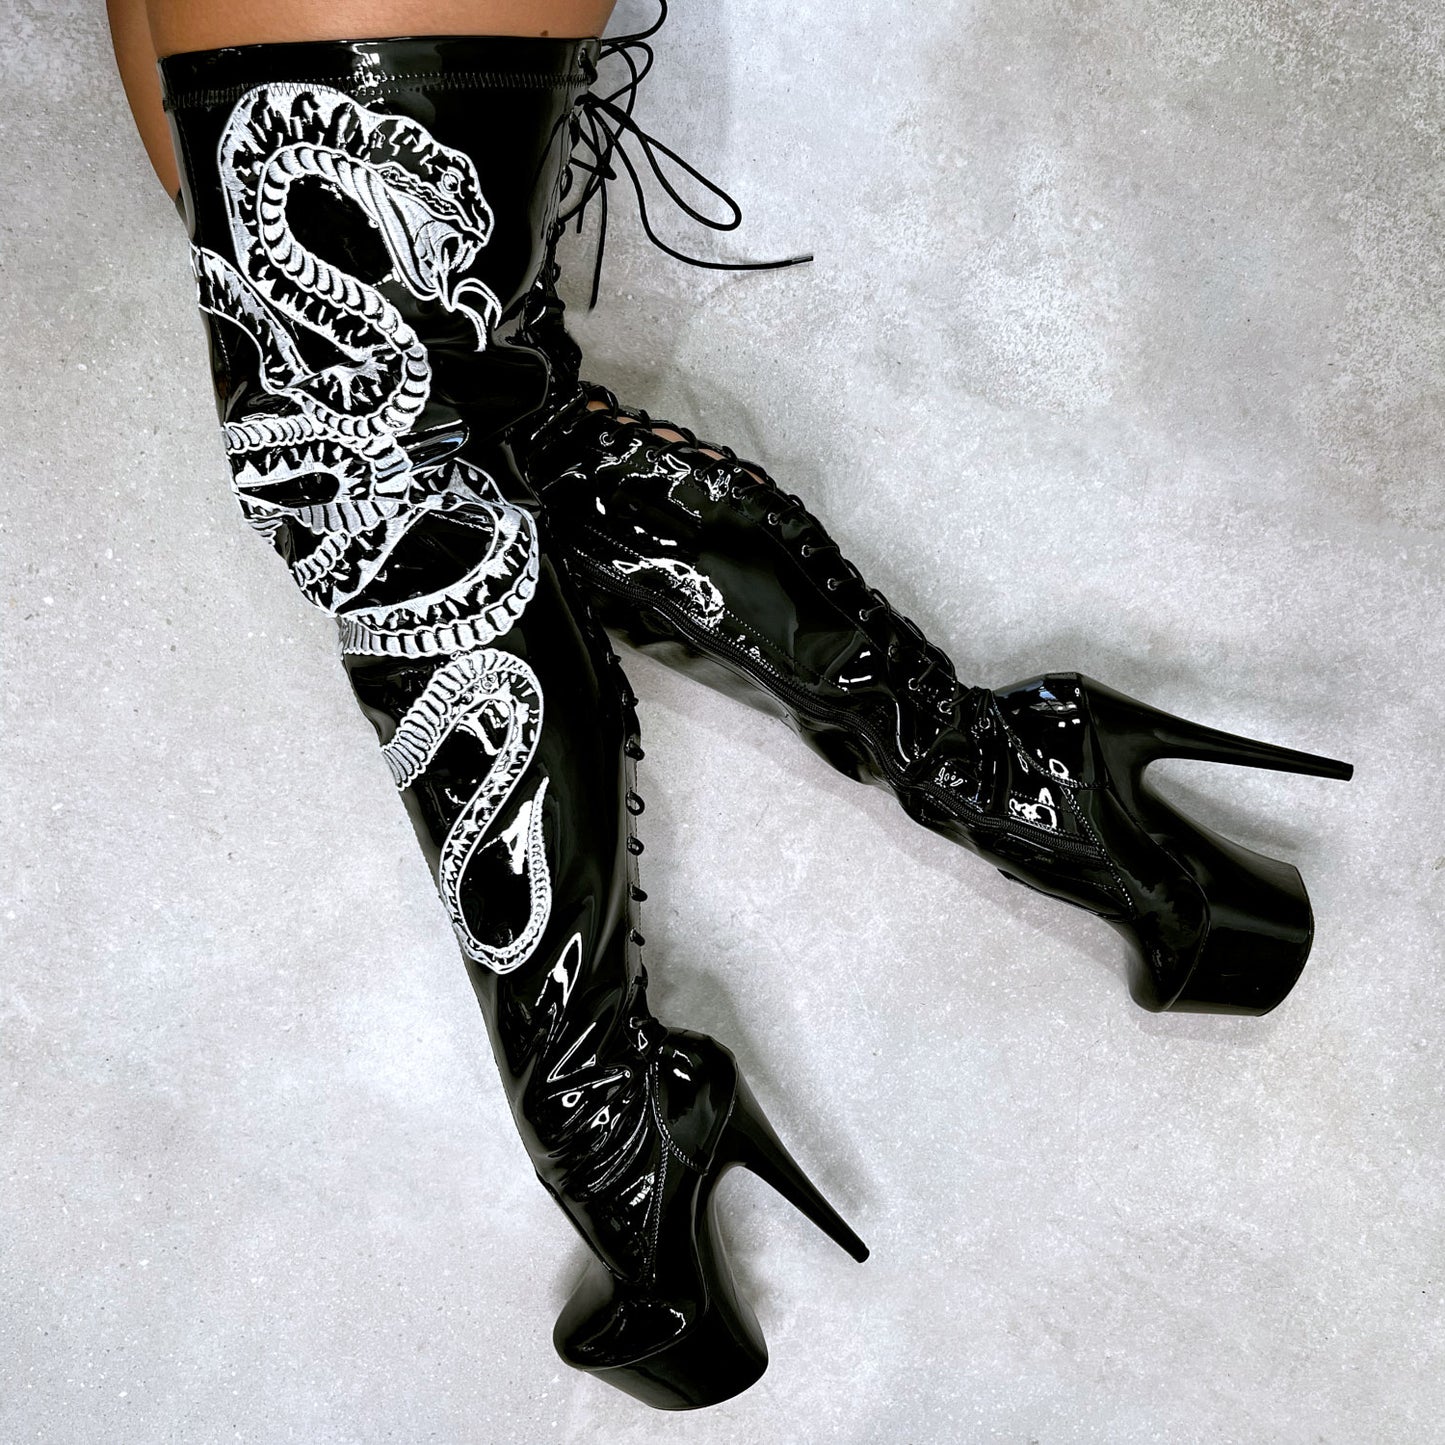 VIPER Boot Black with White Thicc Thigh High - 7INCH